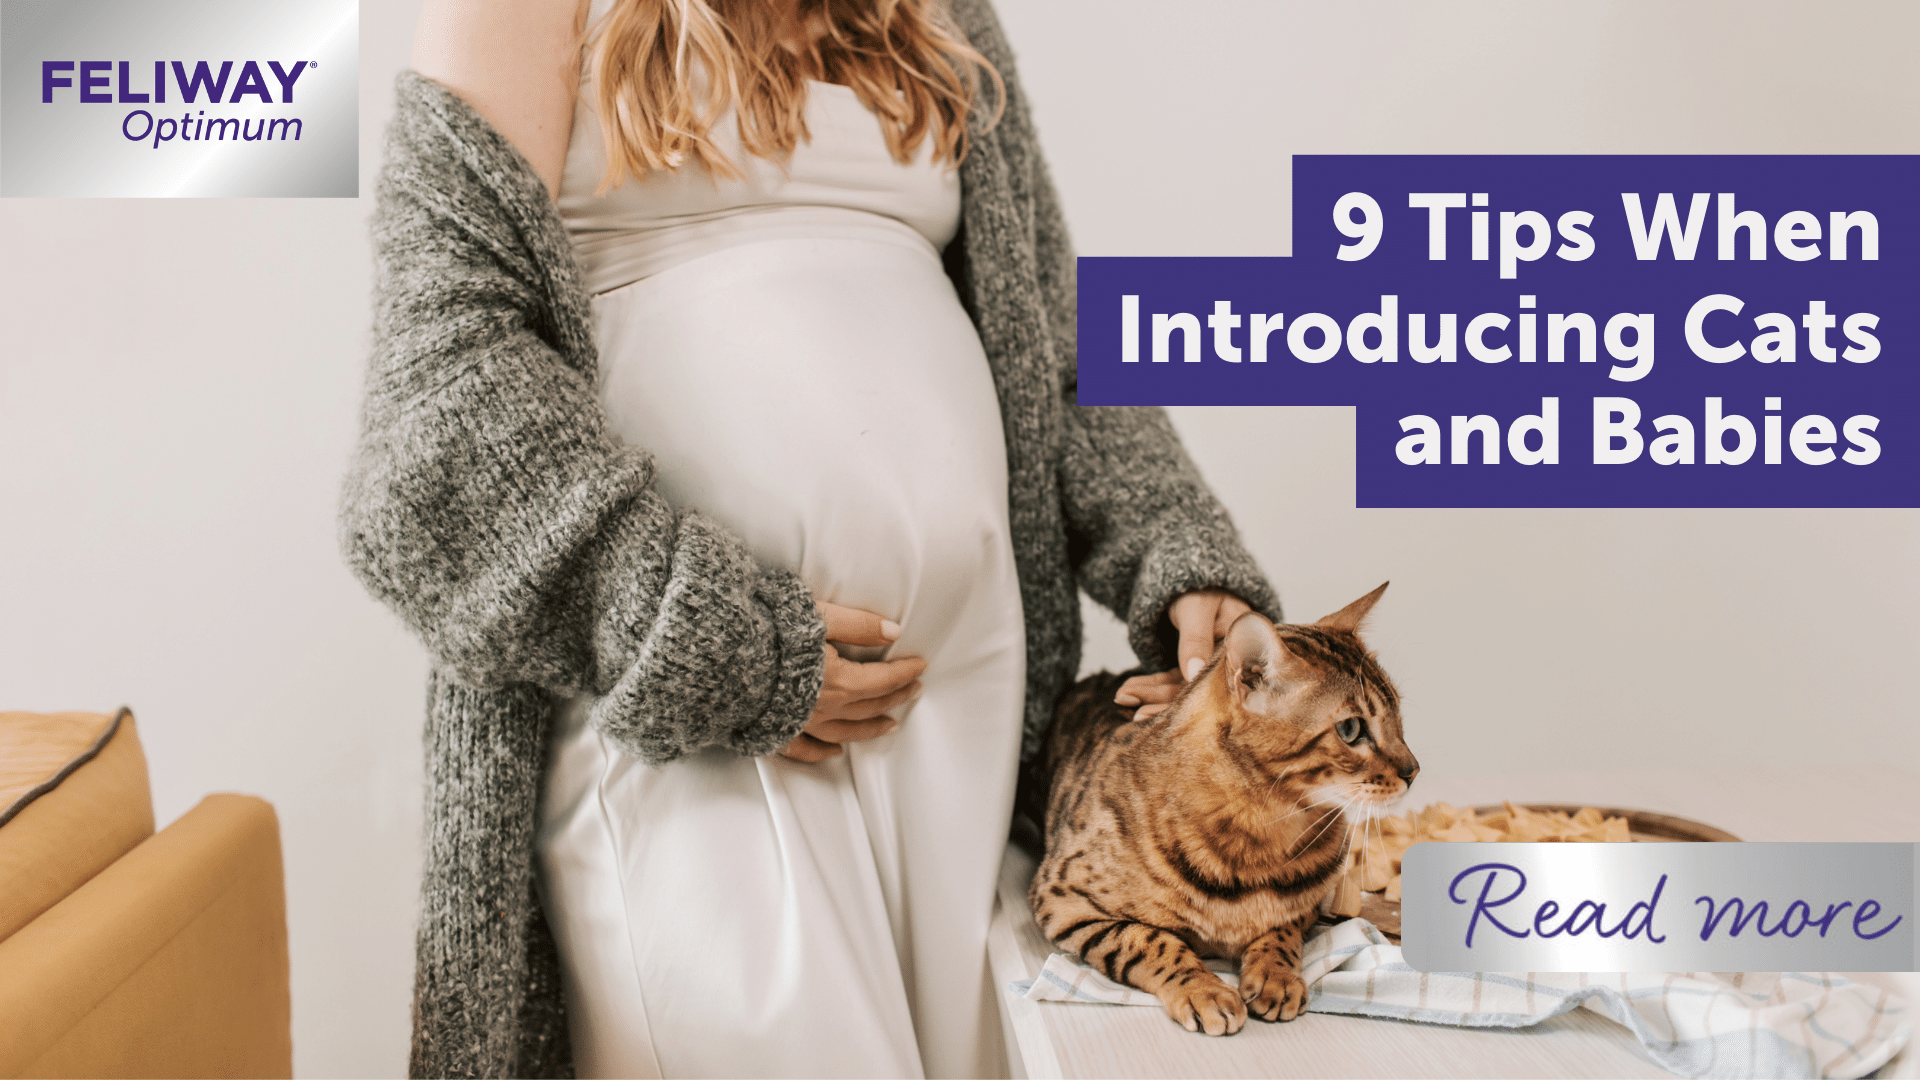 9 Tips When Introducing Cats and Babies